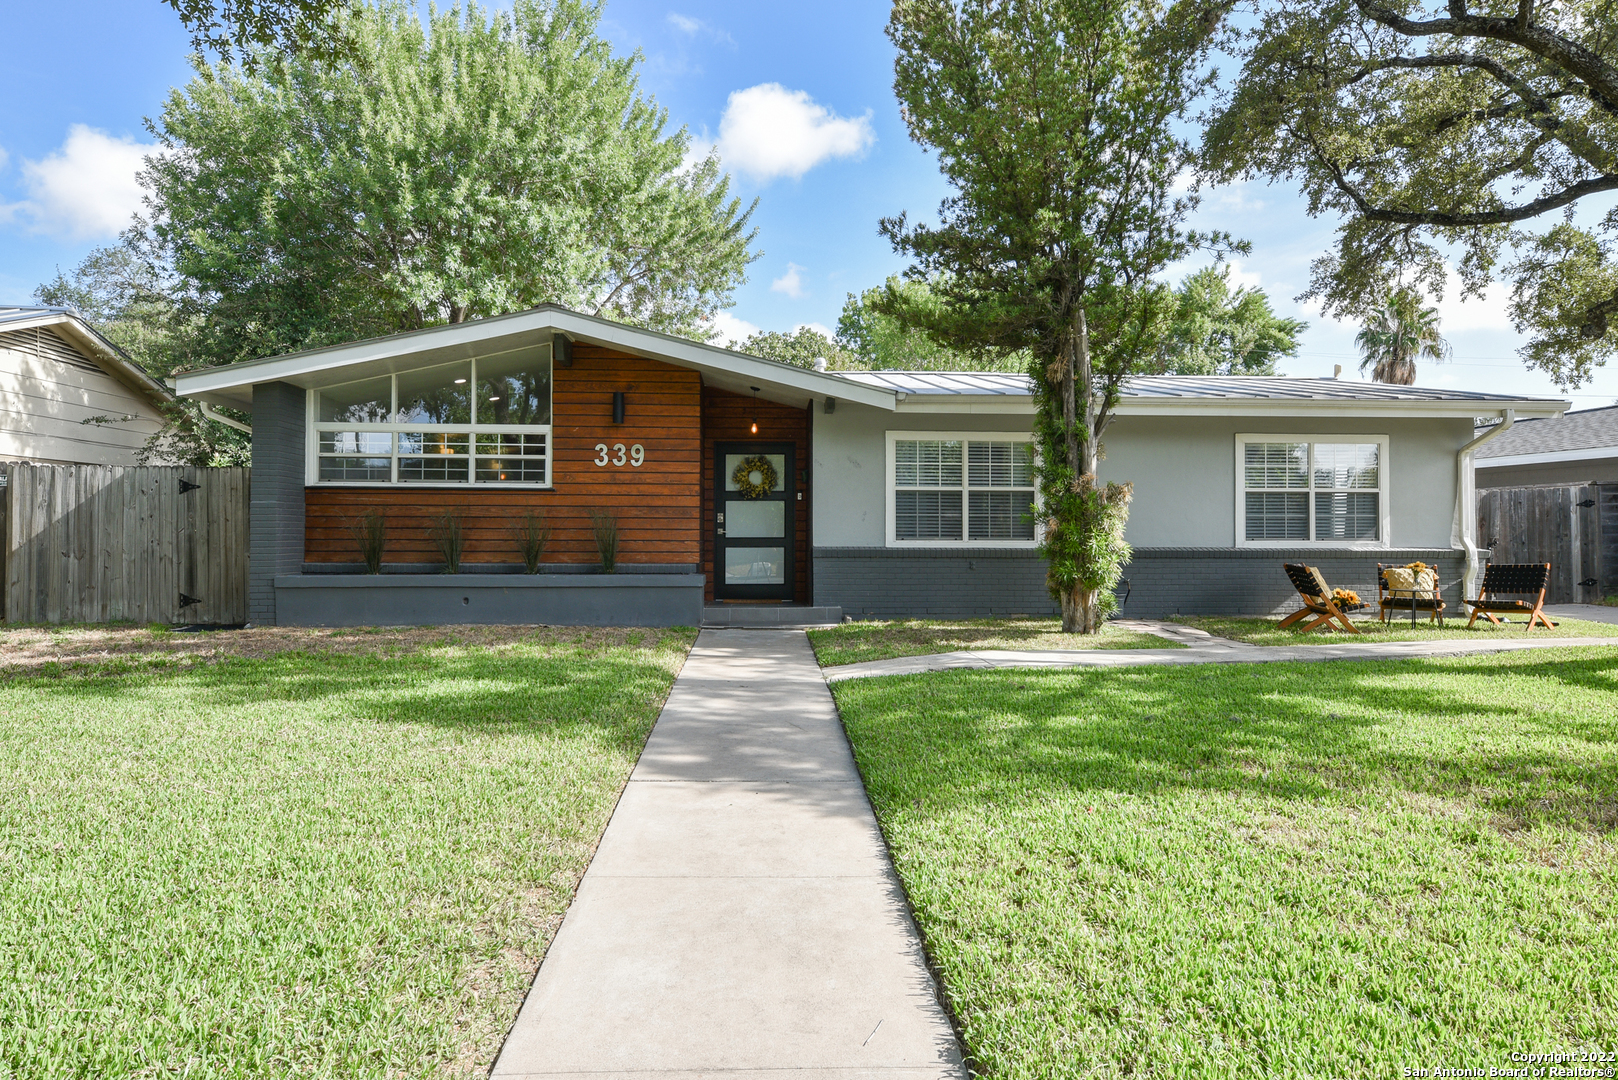 **OPEN HOUSE: Saturday, Jan 21st, 1-4PM & Sunday, Jan 22nd, 1-4PM**  Offering multiple finance options, 2-1 Buydown or VA Assumable loan*, this stunning mid-century modern is located in desirable Alamo Heights ISD and on one of the loveliest streets in Northridge. Updated with emphasis on a classic easy living style. The Master Suite addition, with a full bath and huge walk-in closet, completes this exceptional property consisting of a total of 4 bedrooms and 3 full baths. The spacious kitchen features quartz countertops, gas cooking, and stainless steel appliances. (All appliances convey.) The art-deco marble tiled fireplace showcases the spacious and inviting living room.  Beautiful inside and out with many upgrades and improvements, including tankless water heaters & 18 Seer HVAC units, and, more...  The location cannot be beaten:  schools within walking distance, upscale shopping, and entertainment within blocks. Note: All major appliances convey.  *Certain terms apply.